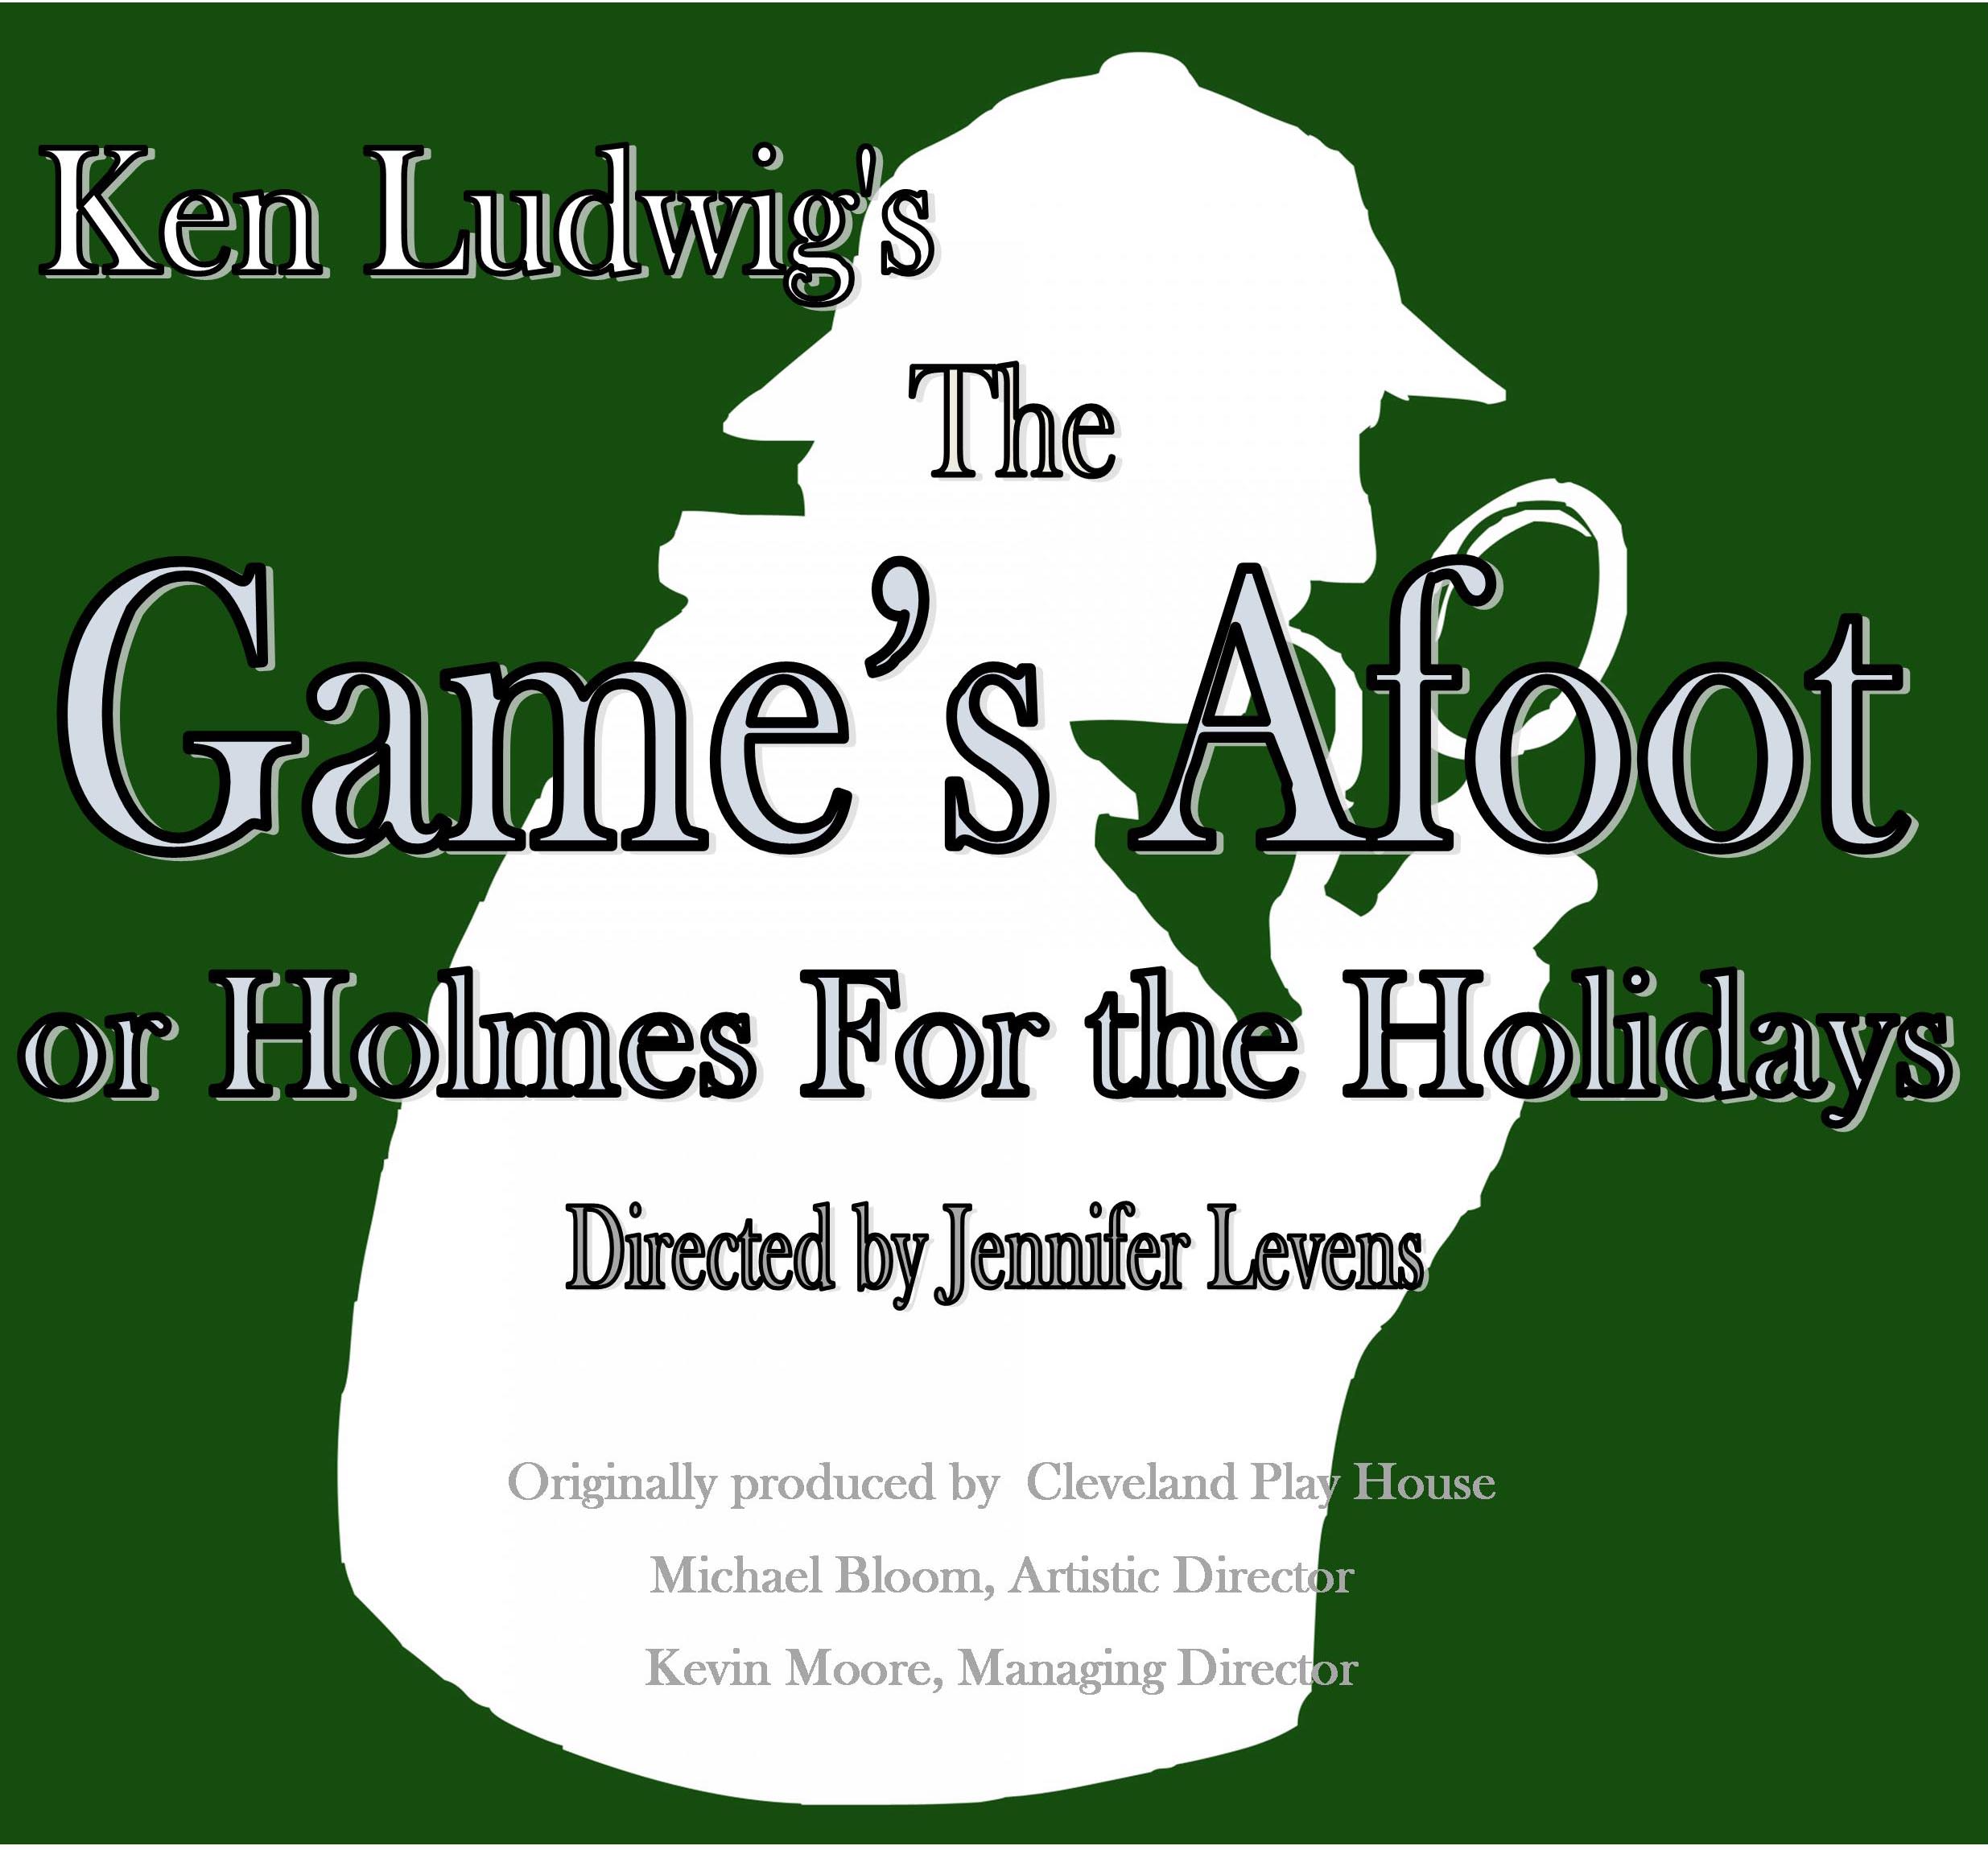 The Game's Afoot Or Holmes For The Holidays